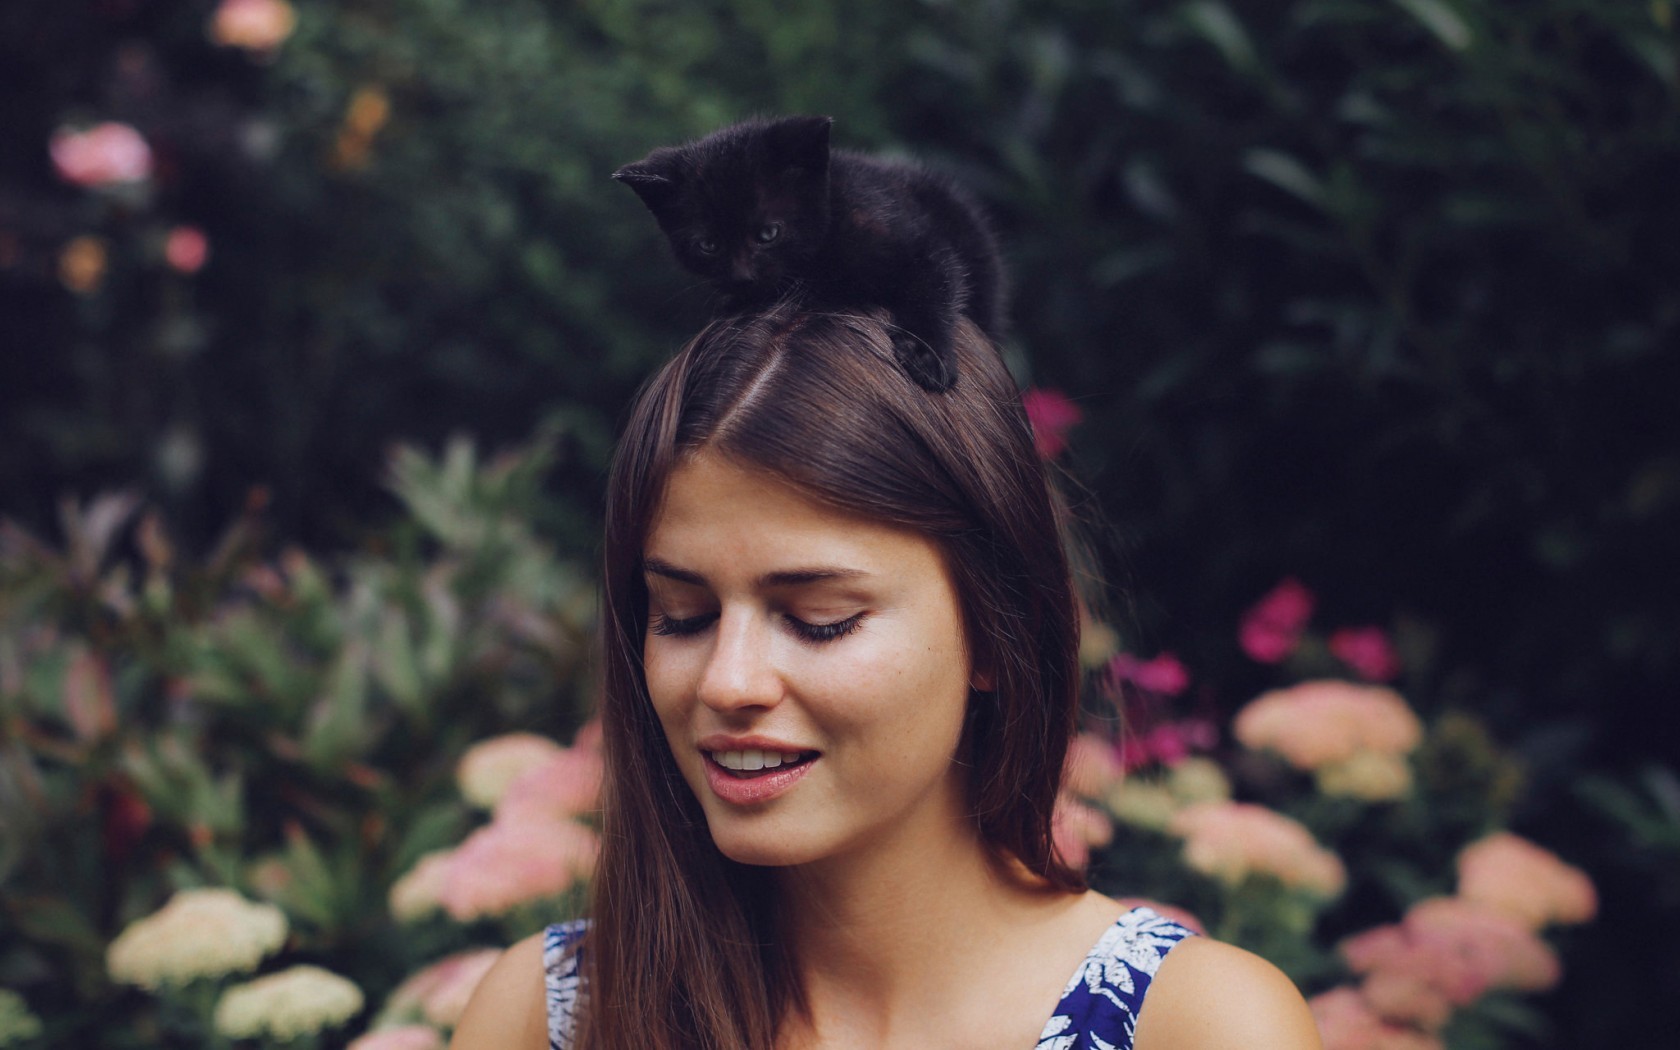 Women Cats Brunette Women With Cat Women Outdoors Closed Eyes Smiling Open Mouth Long Hair Straight  1680x1050